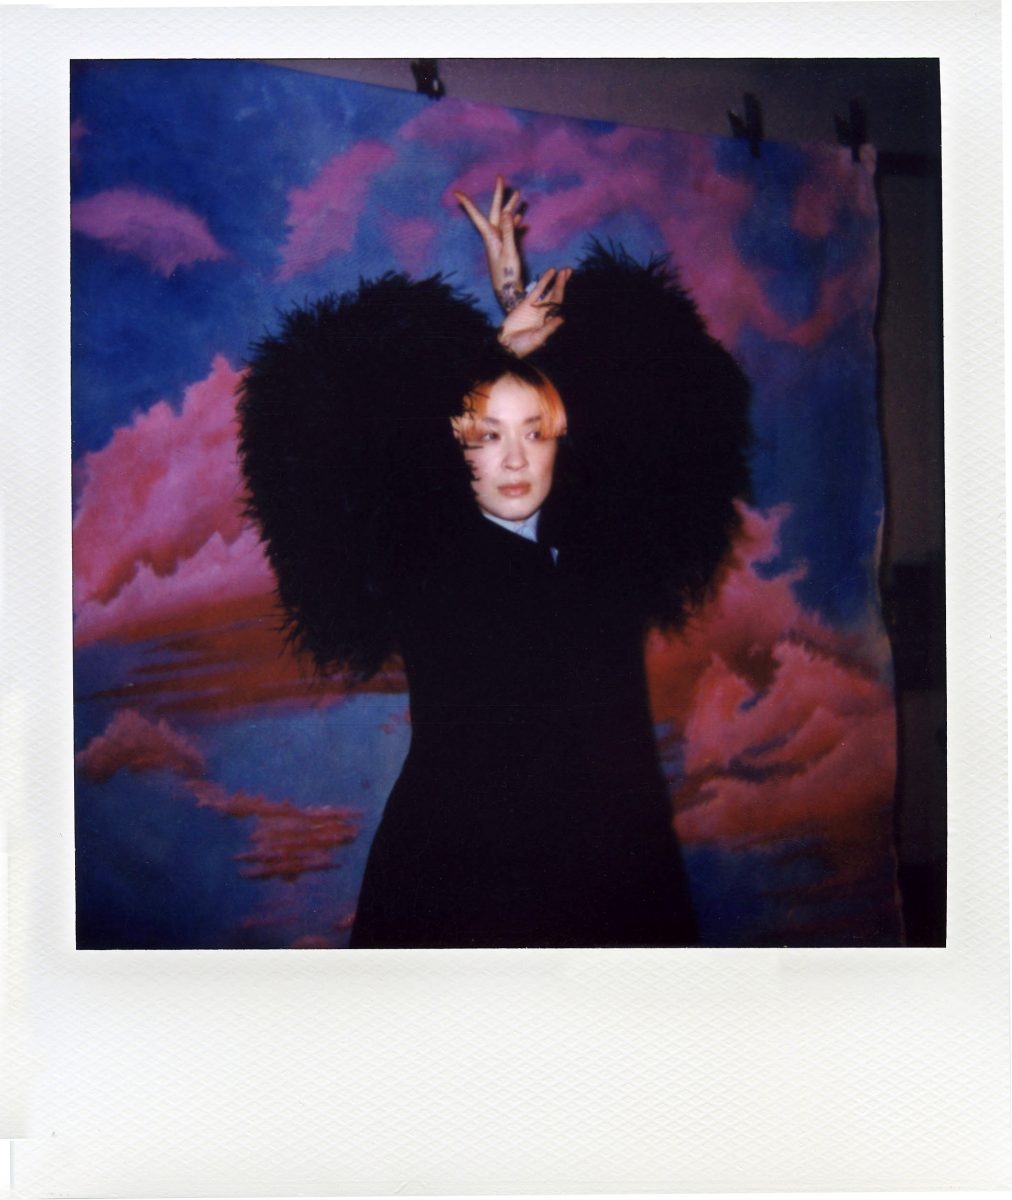 Behind-the-scenes polaroids from Sin Wai Kin and Tai Shani's Elephant shoot in early 2022